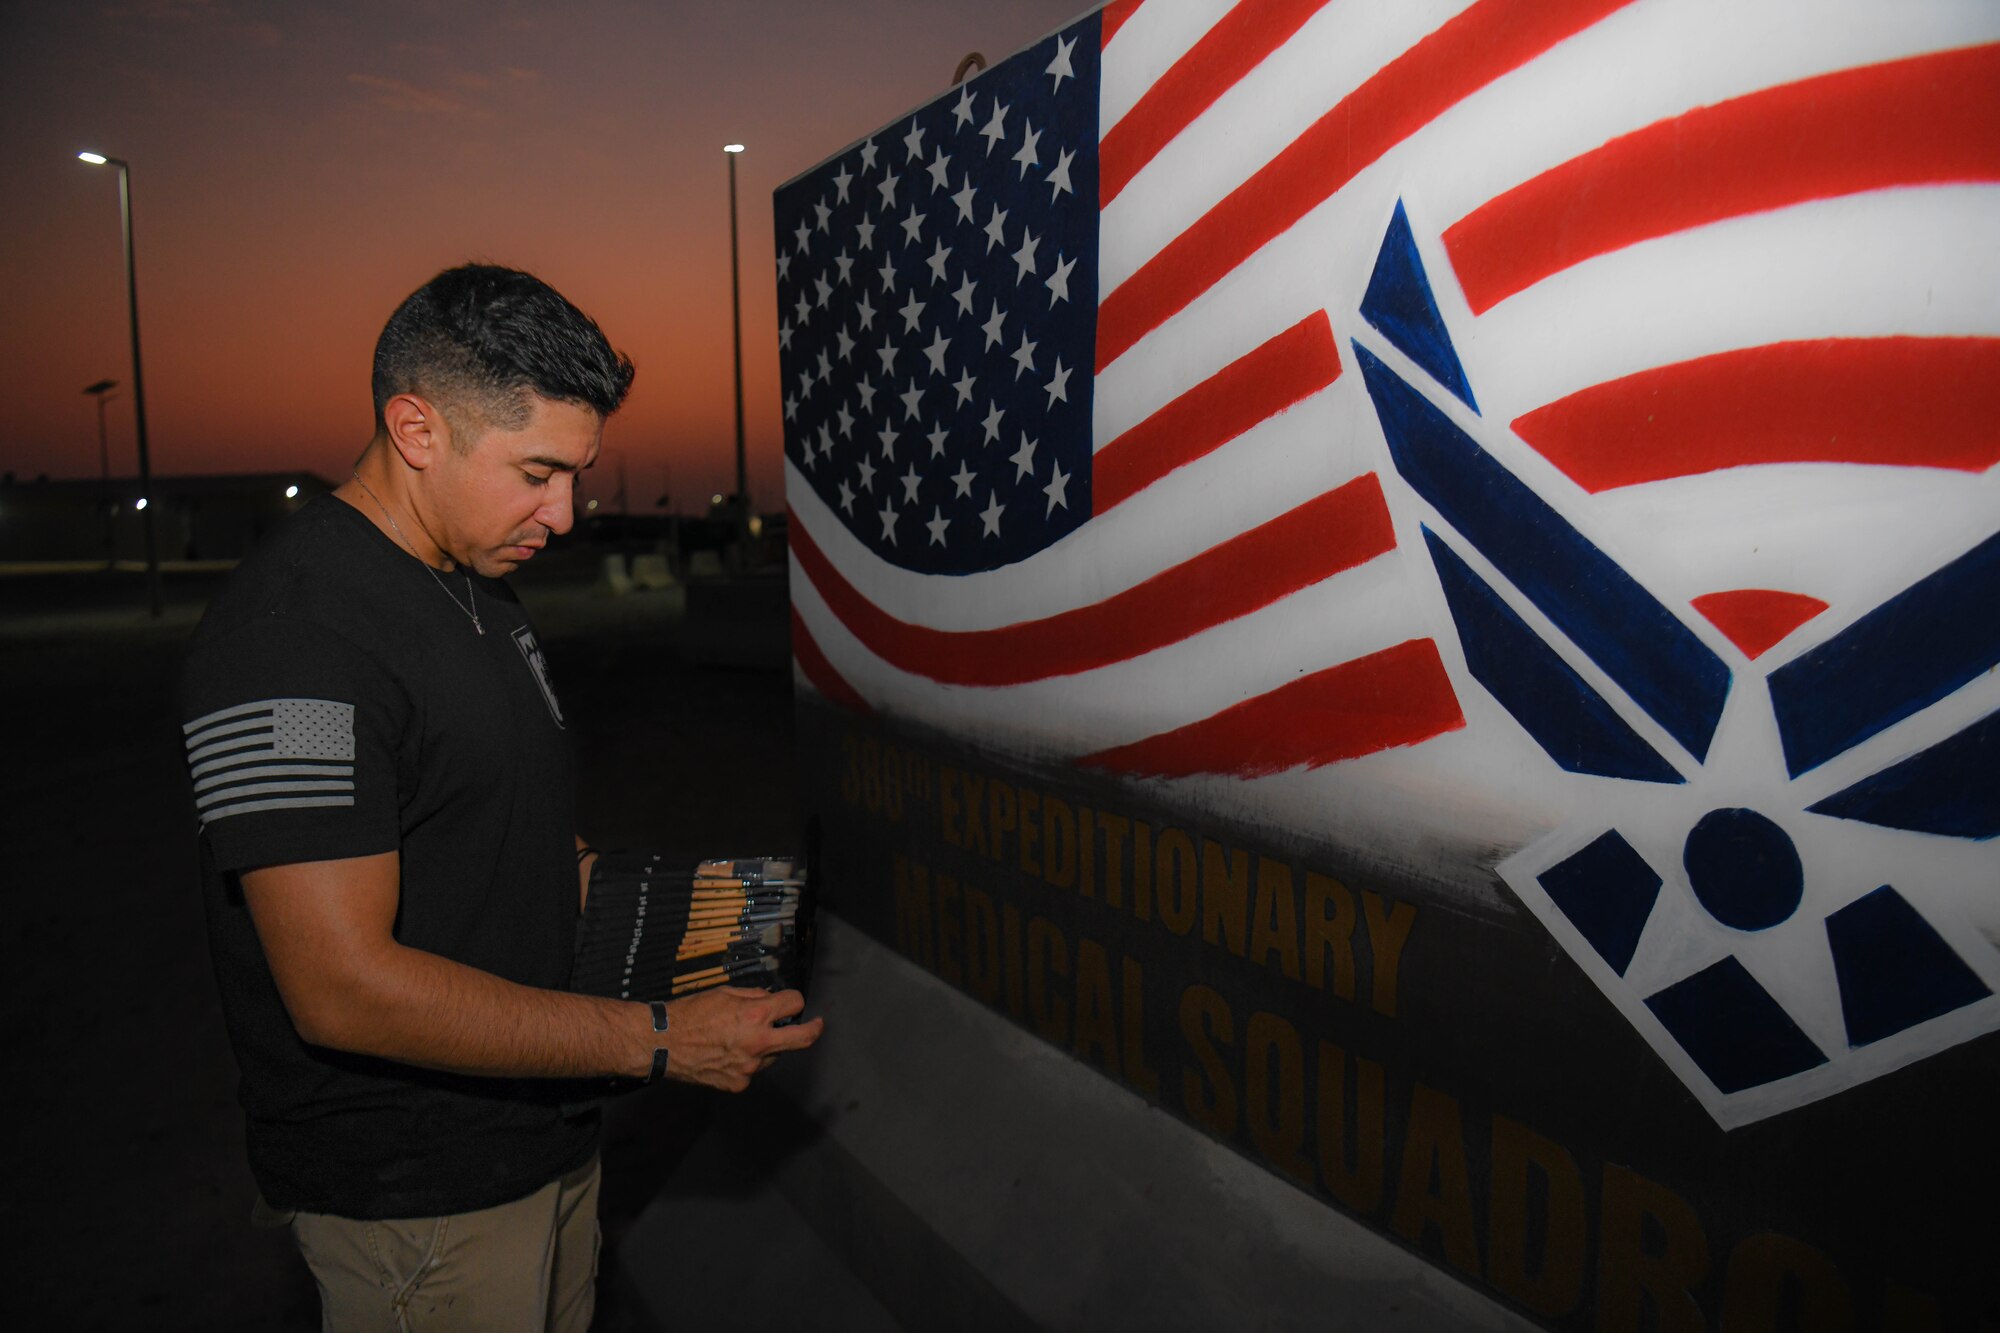 U.S. Army Sgt. Anthony Castillo, a mobility specialist assigned to the 3-157th Field Artillery unit and Colorado National Guardsmen, paints ten murals across Al Dhafra Air Base.